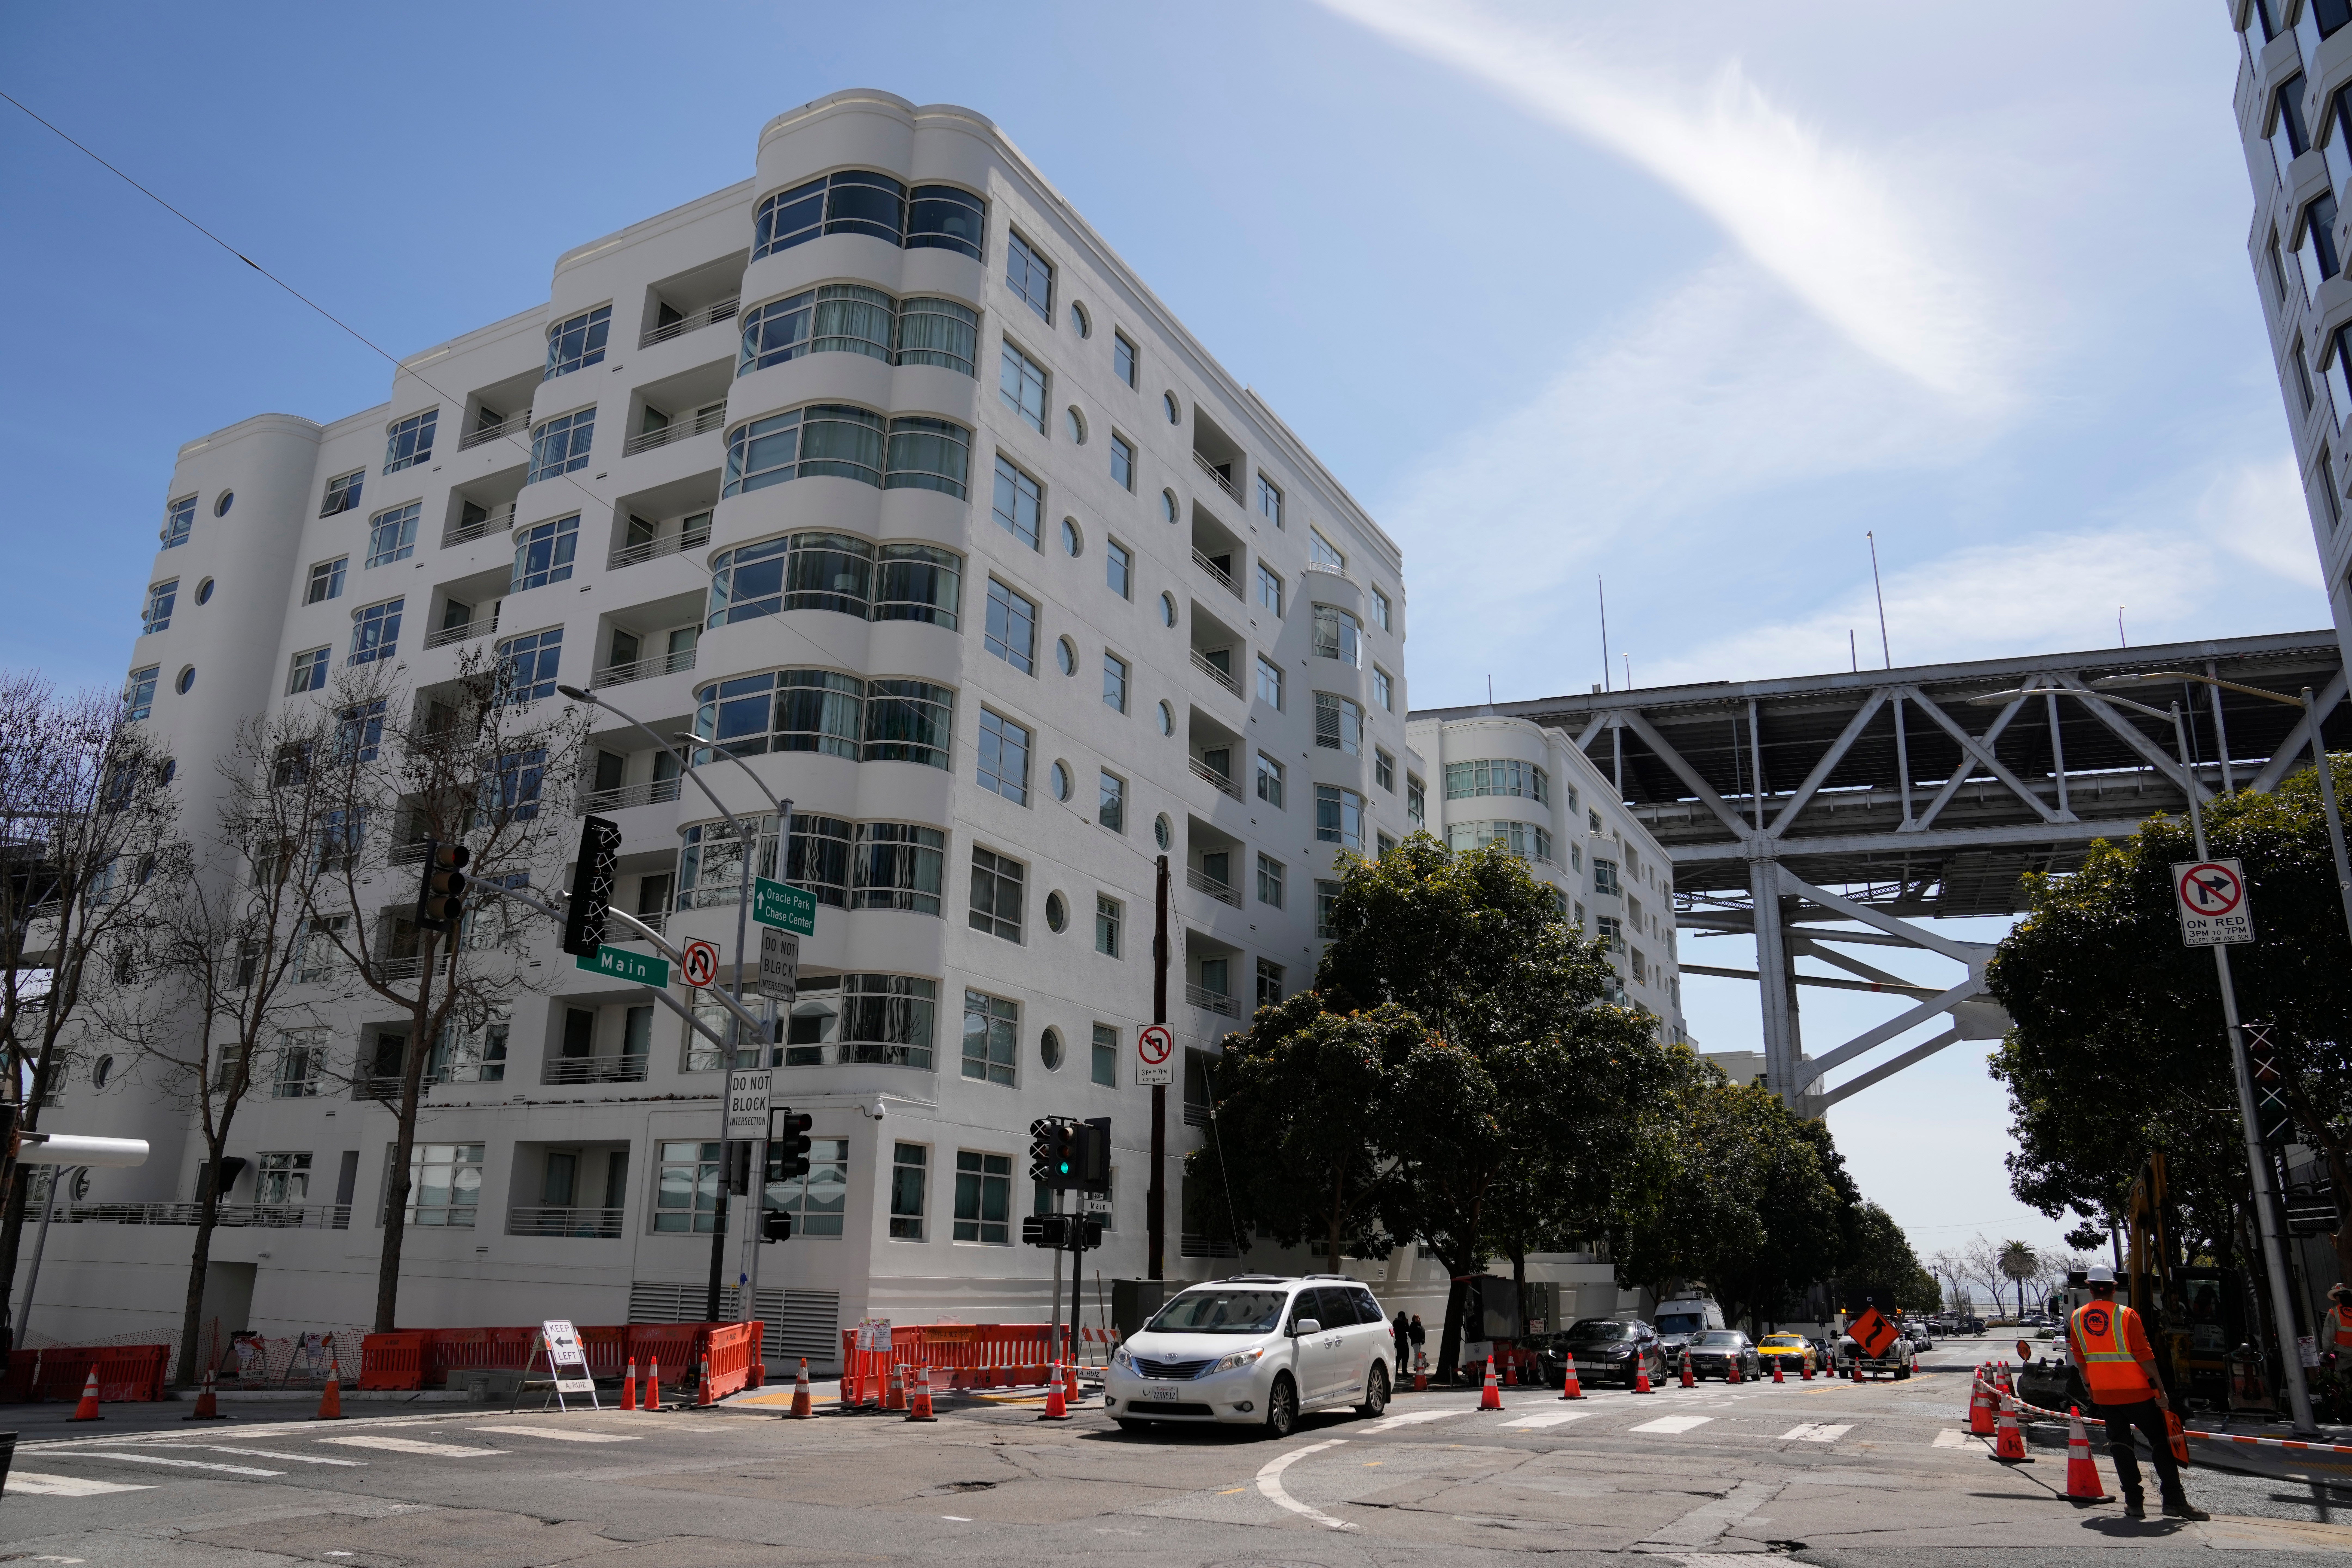 An apartment building below the San Francisco-Oakland Bay Bridge where technology executive Bob Lee was found with fatal stab wounds on Tuesday.